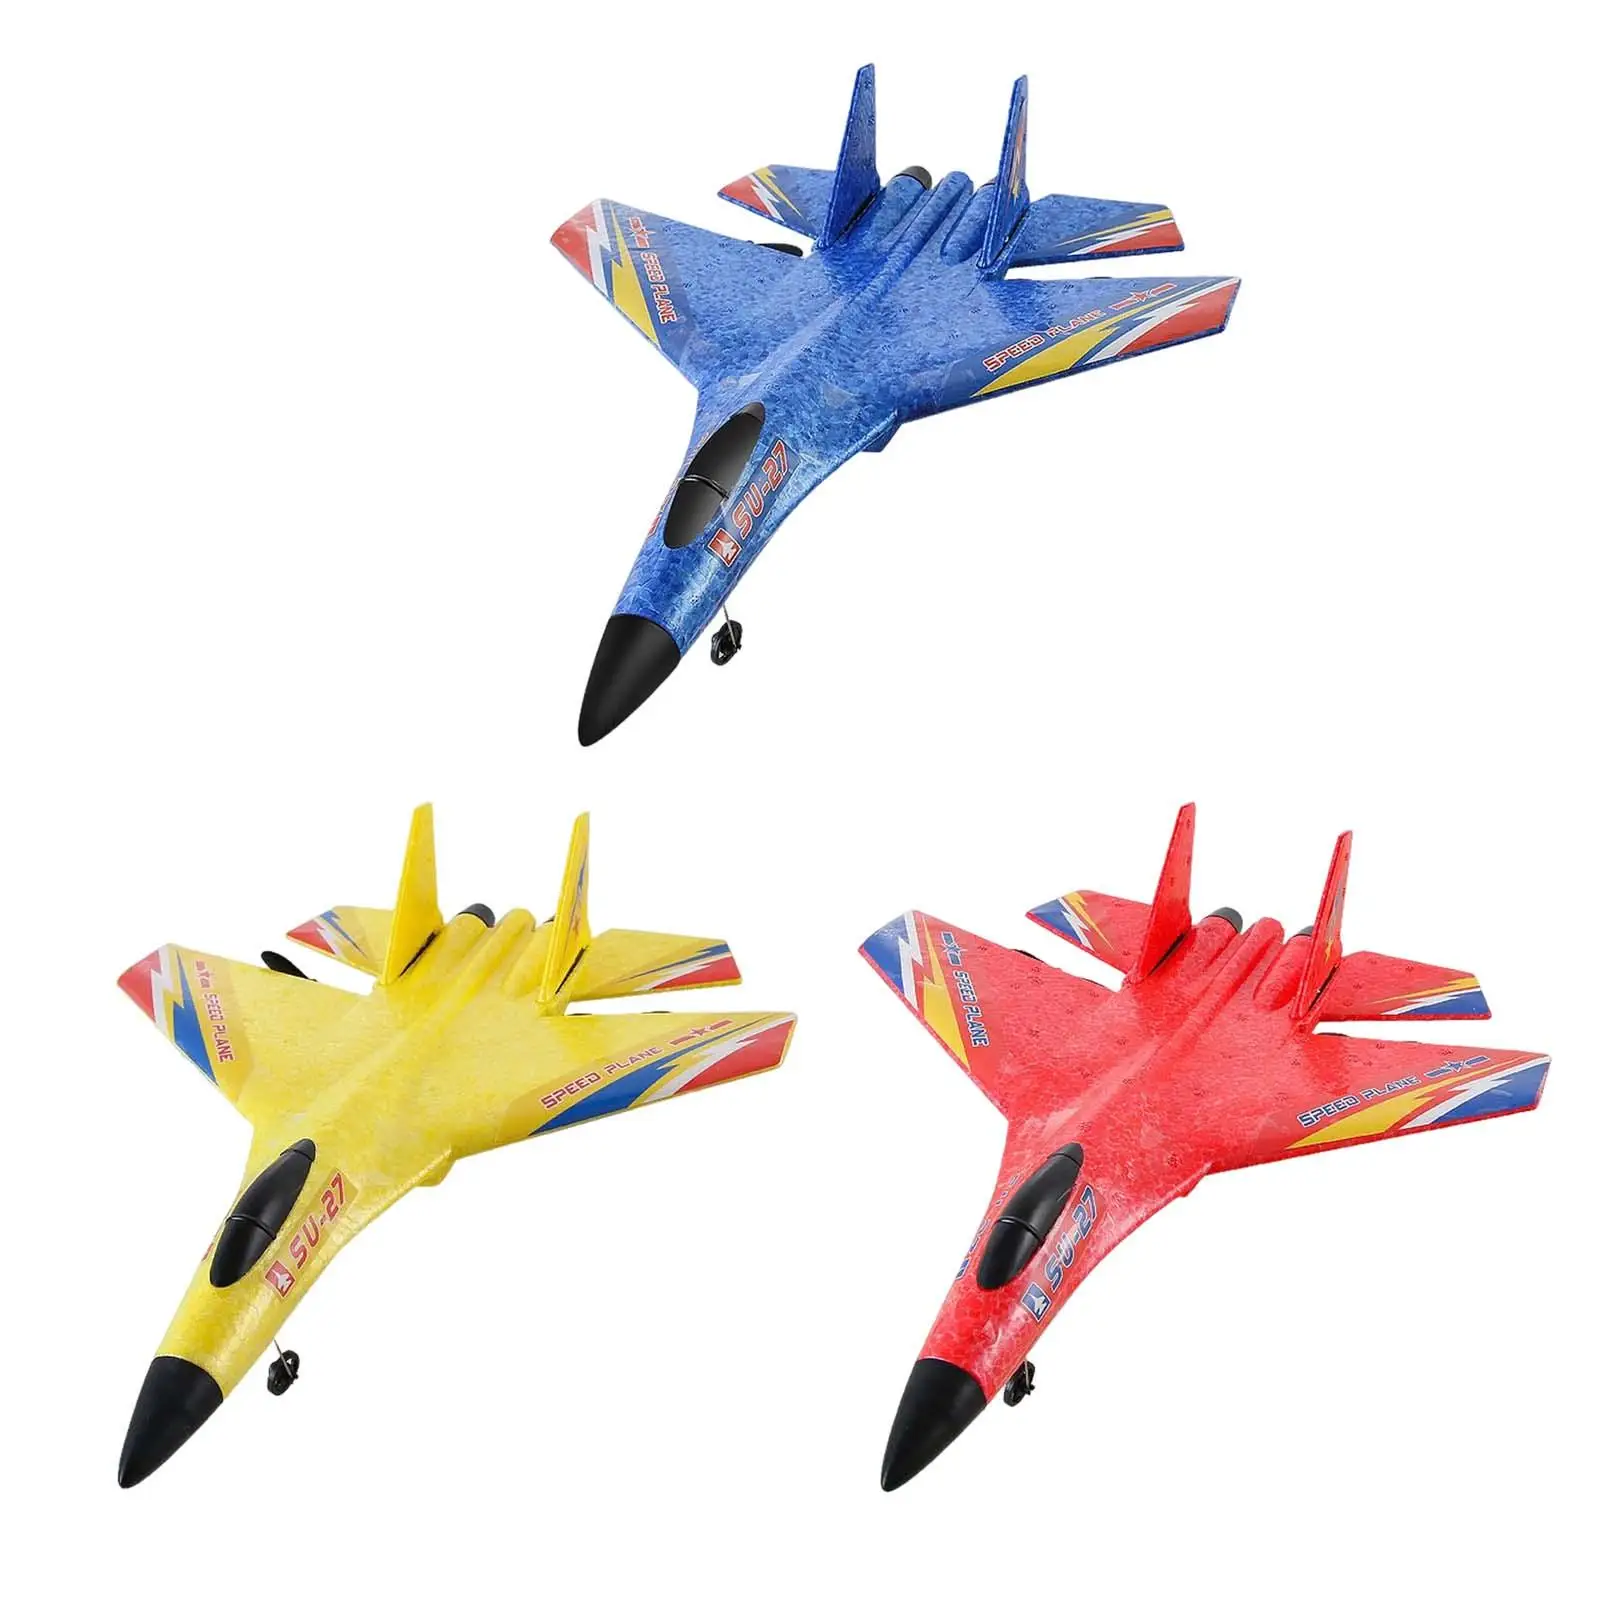 

2.4G 2CH RC Airplane, Remote Control Plane Anti Collision Aircraft Glider for Ages 8 10 12 Kids Beginners Boys Gifts